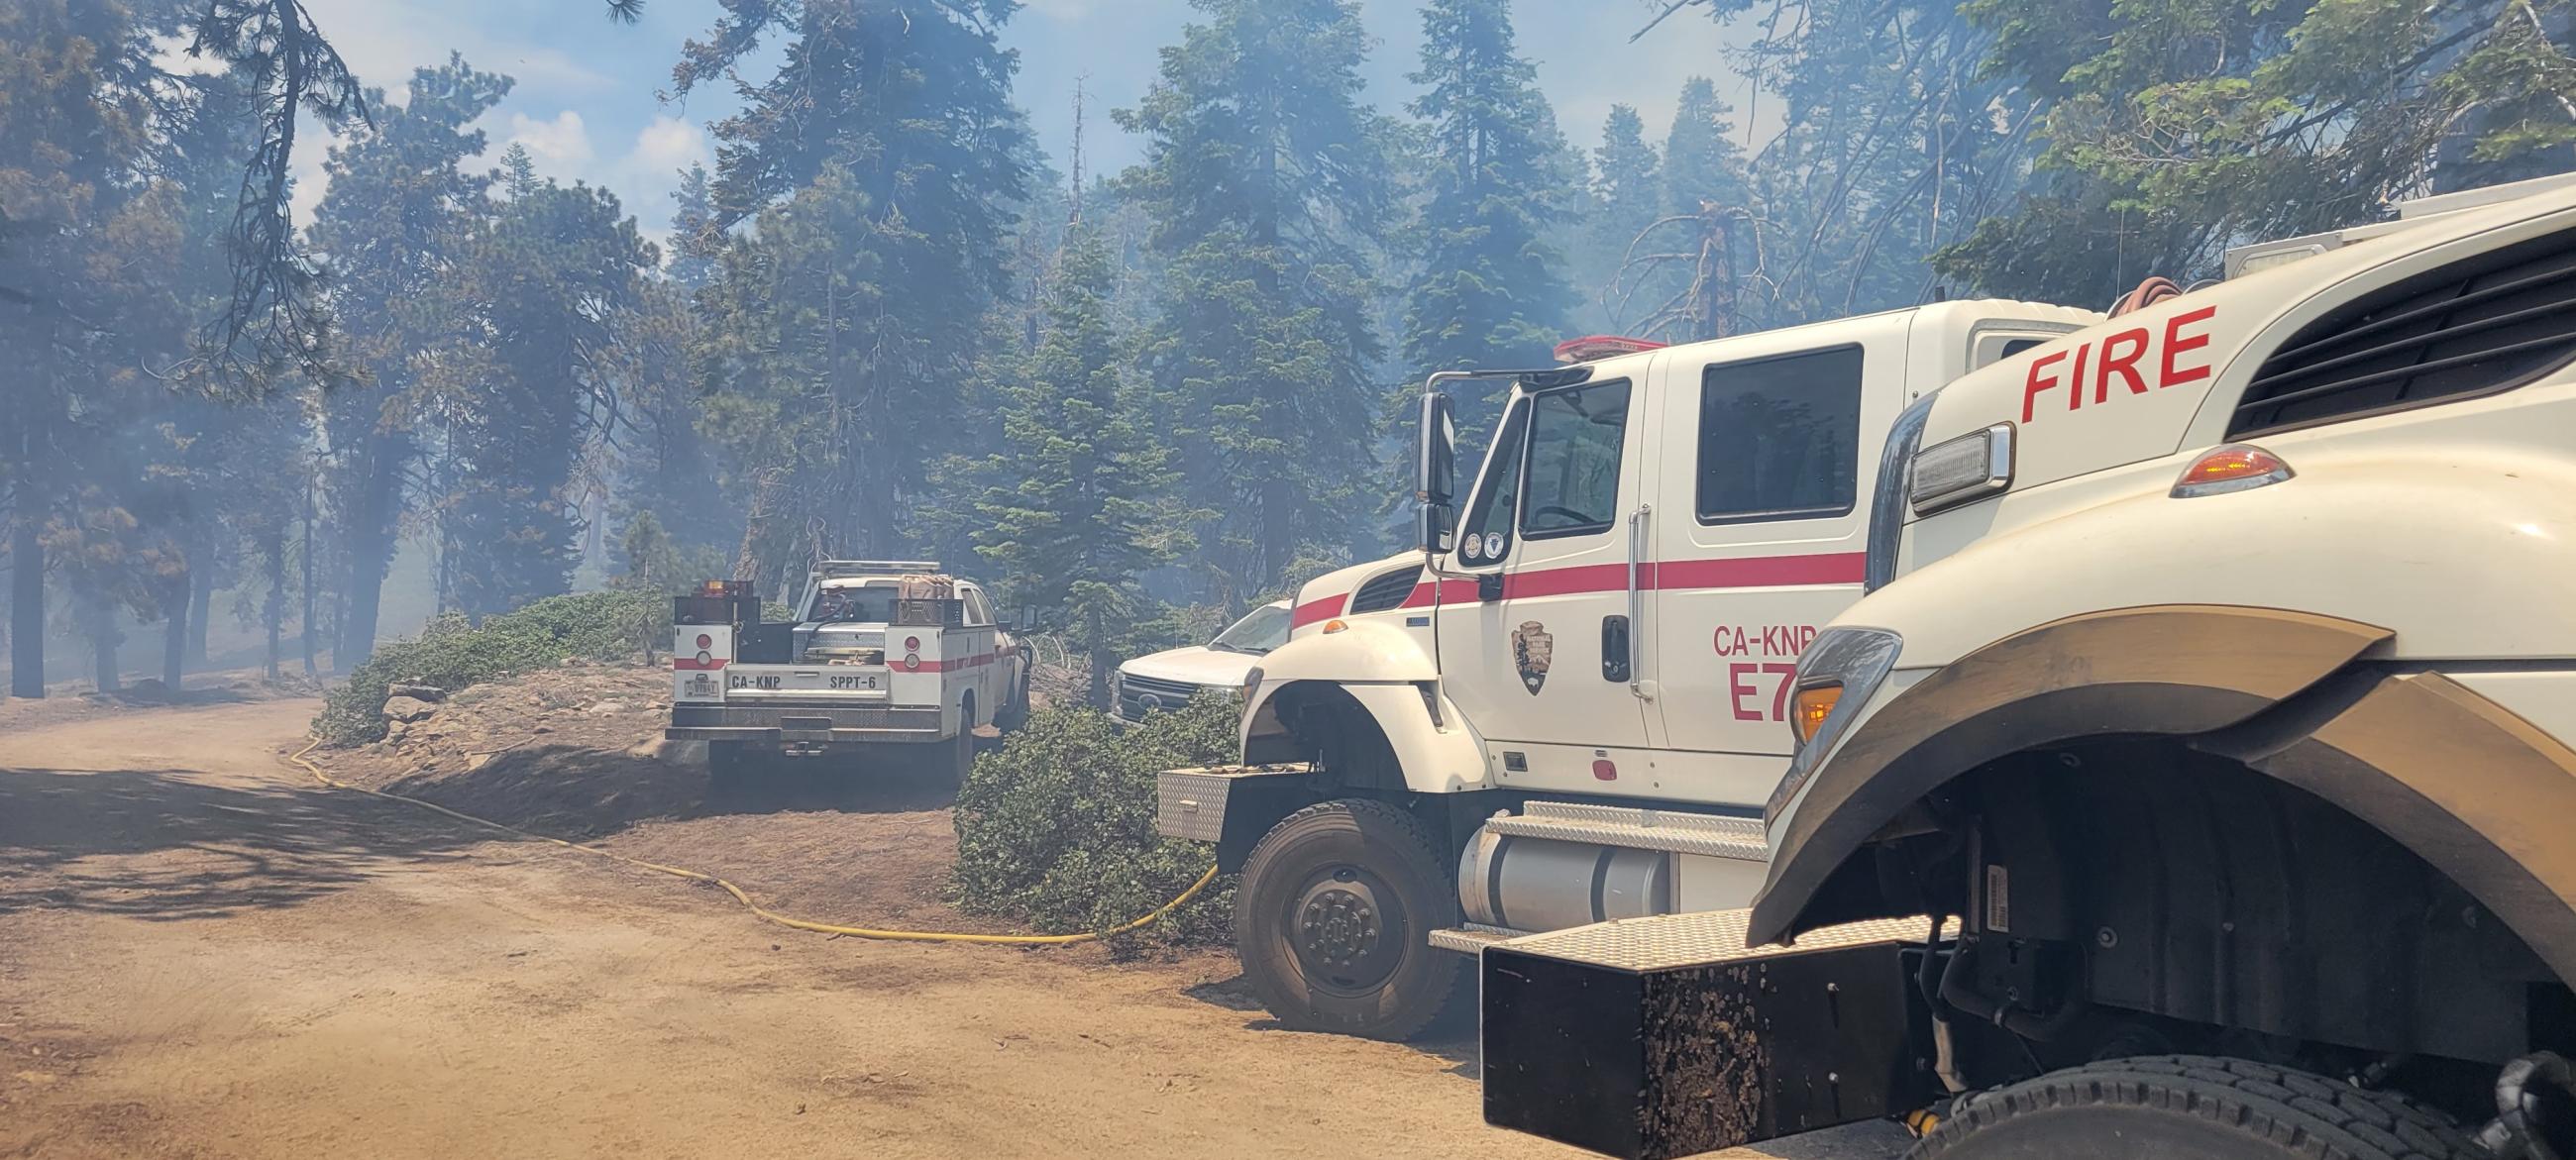 Picture of National Park Service fire trucks with forest and smoke in the background.